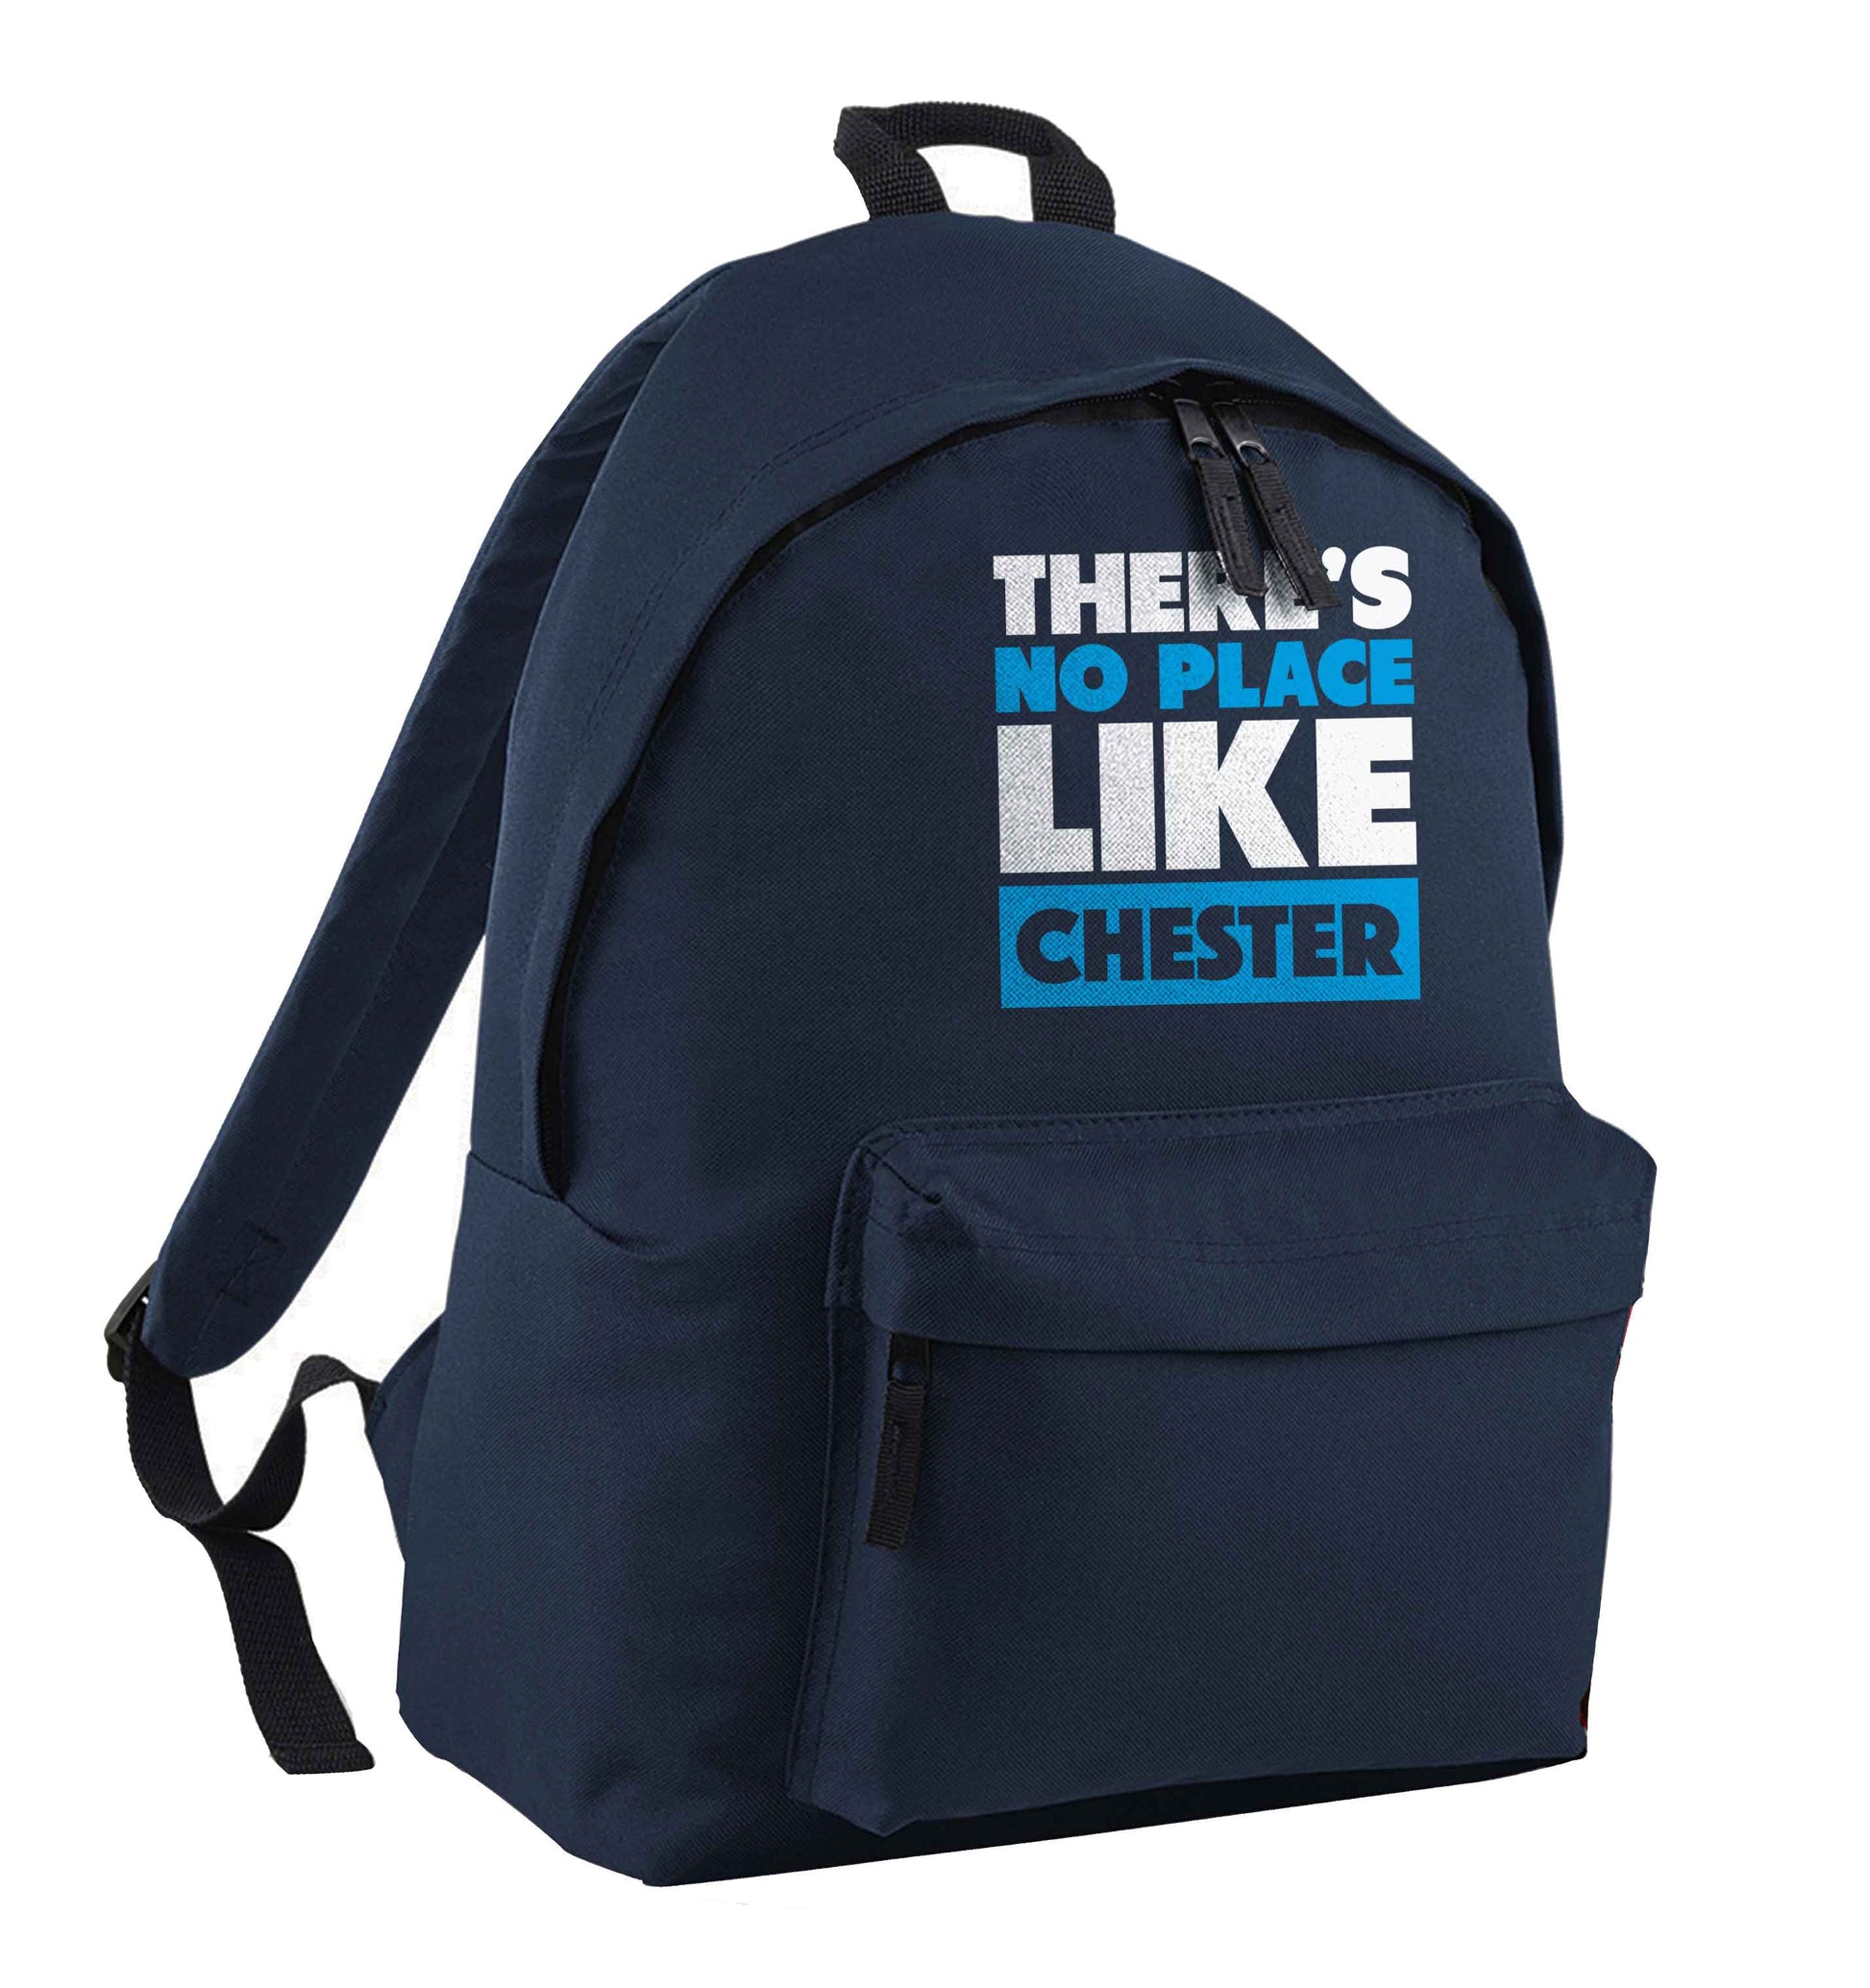 There's no place like Chester navy children's backpack